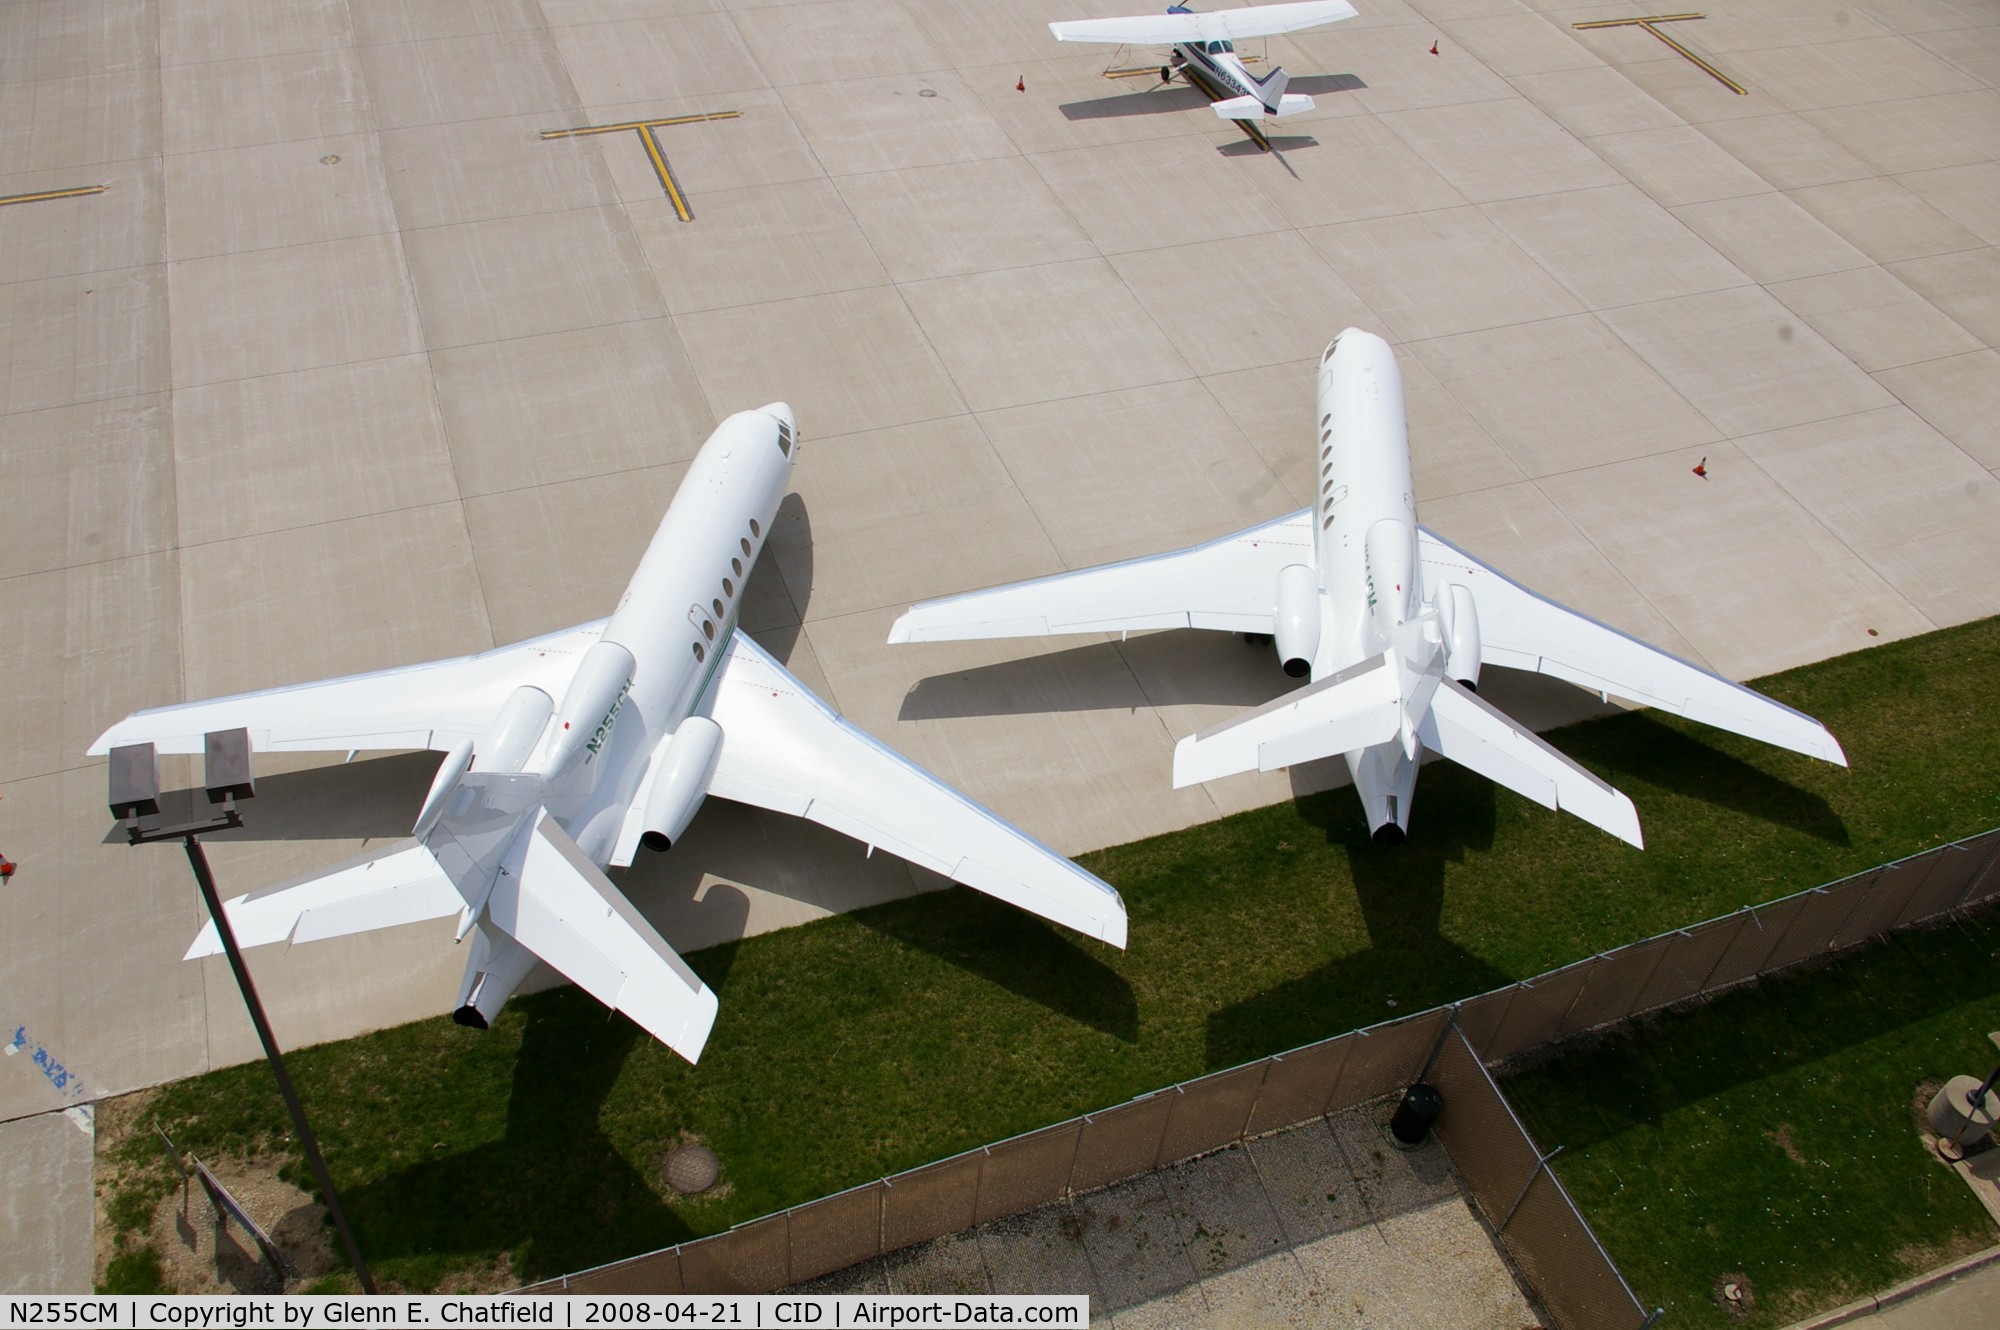 N255CM, 1996 Dassault Falcon 50 C/N 255, Below the control tower.  Plane on the right is N344CM.